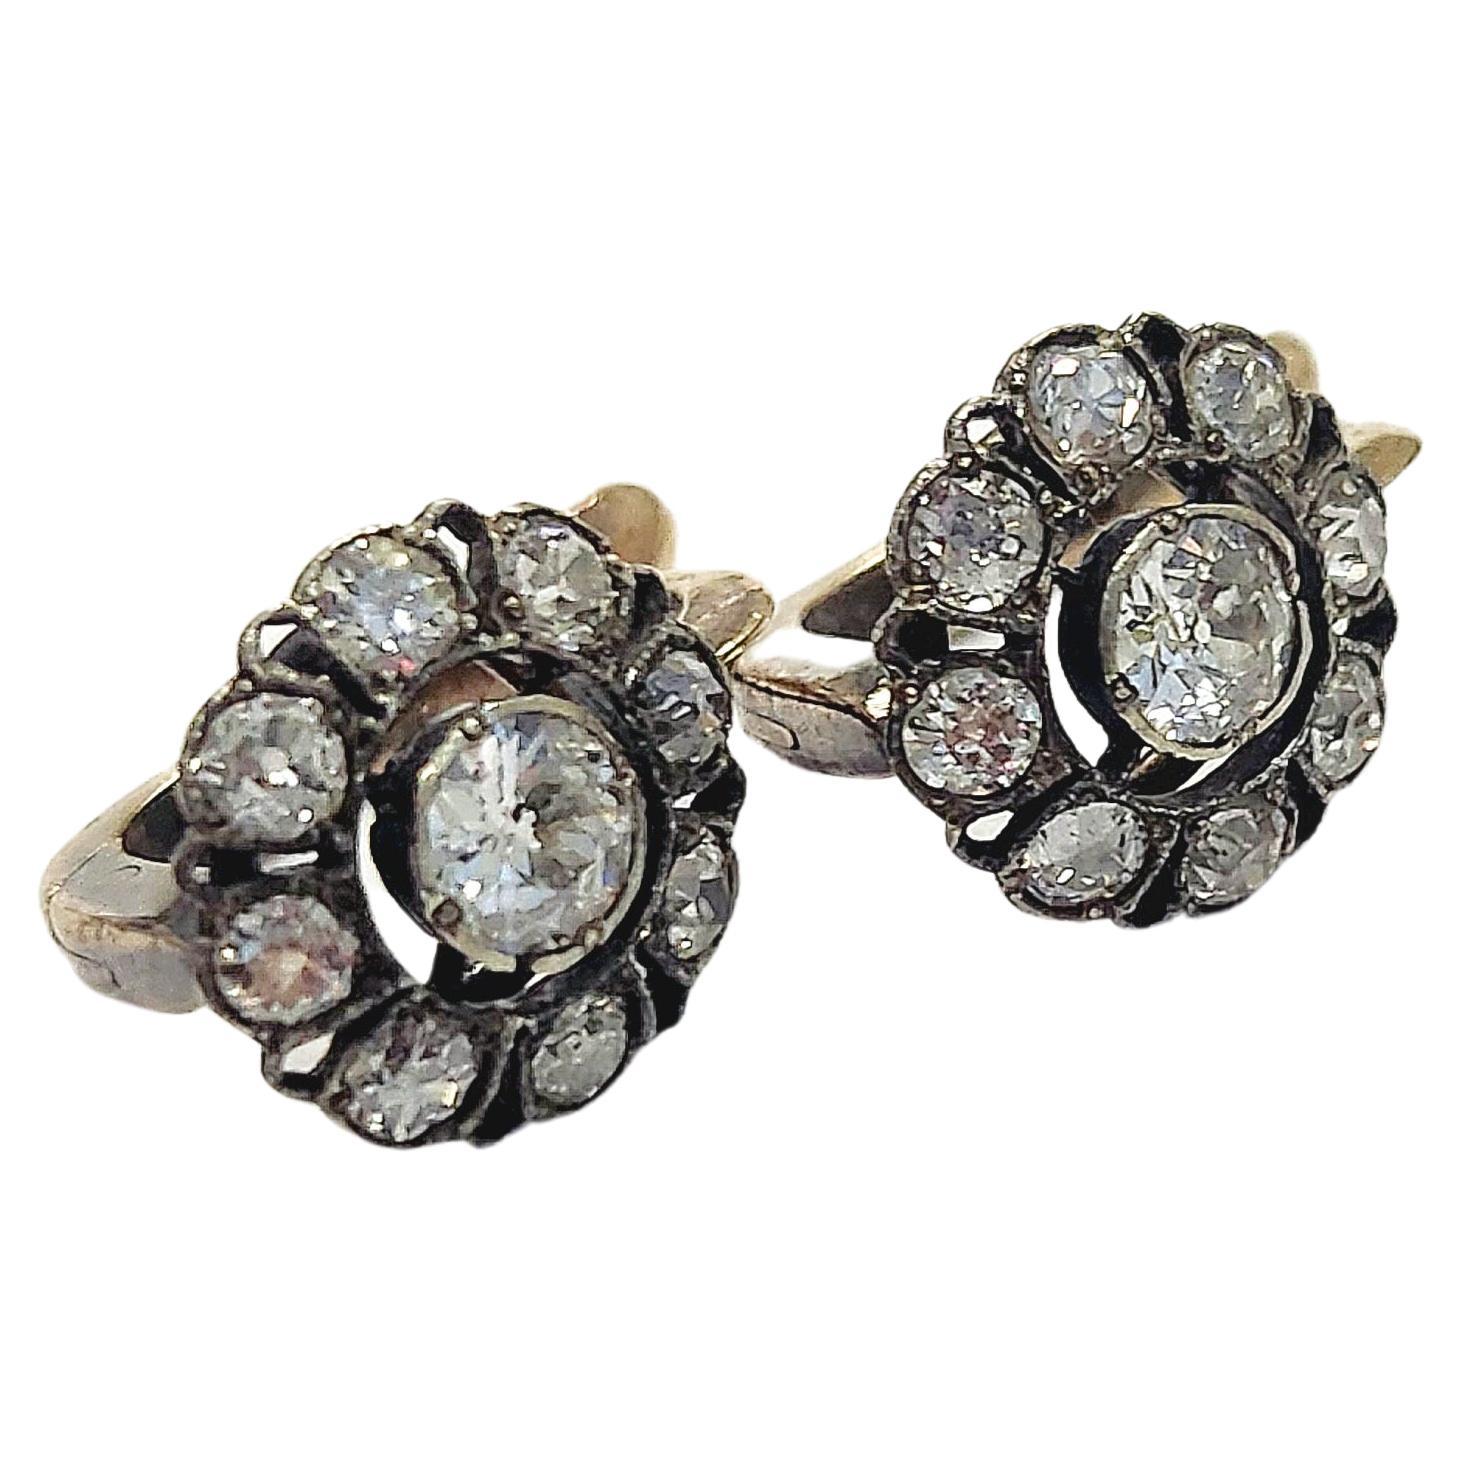 Antique 14k gold earrings centered with old mine cut diamond flanked with smaller old mine cut diamonds with total estimate weight of 1.5 carats H color white excellent spark earrings dates back to the russian tsarist era 1910/1917.c hall marked 56